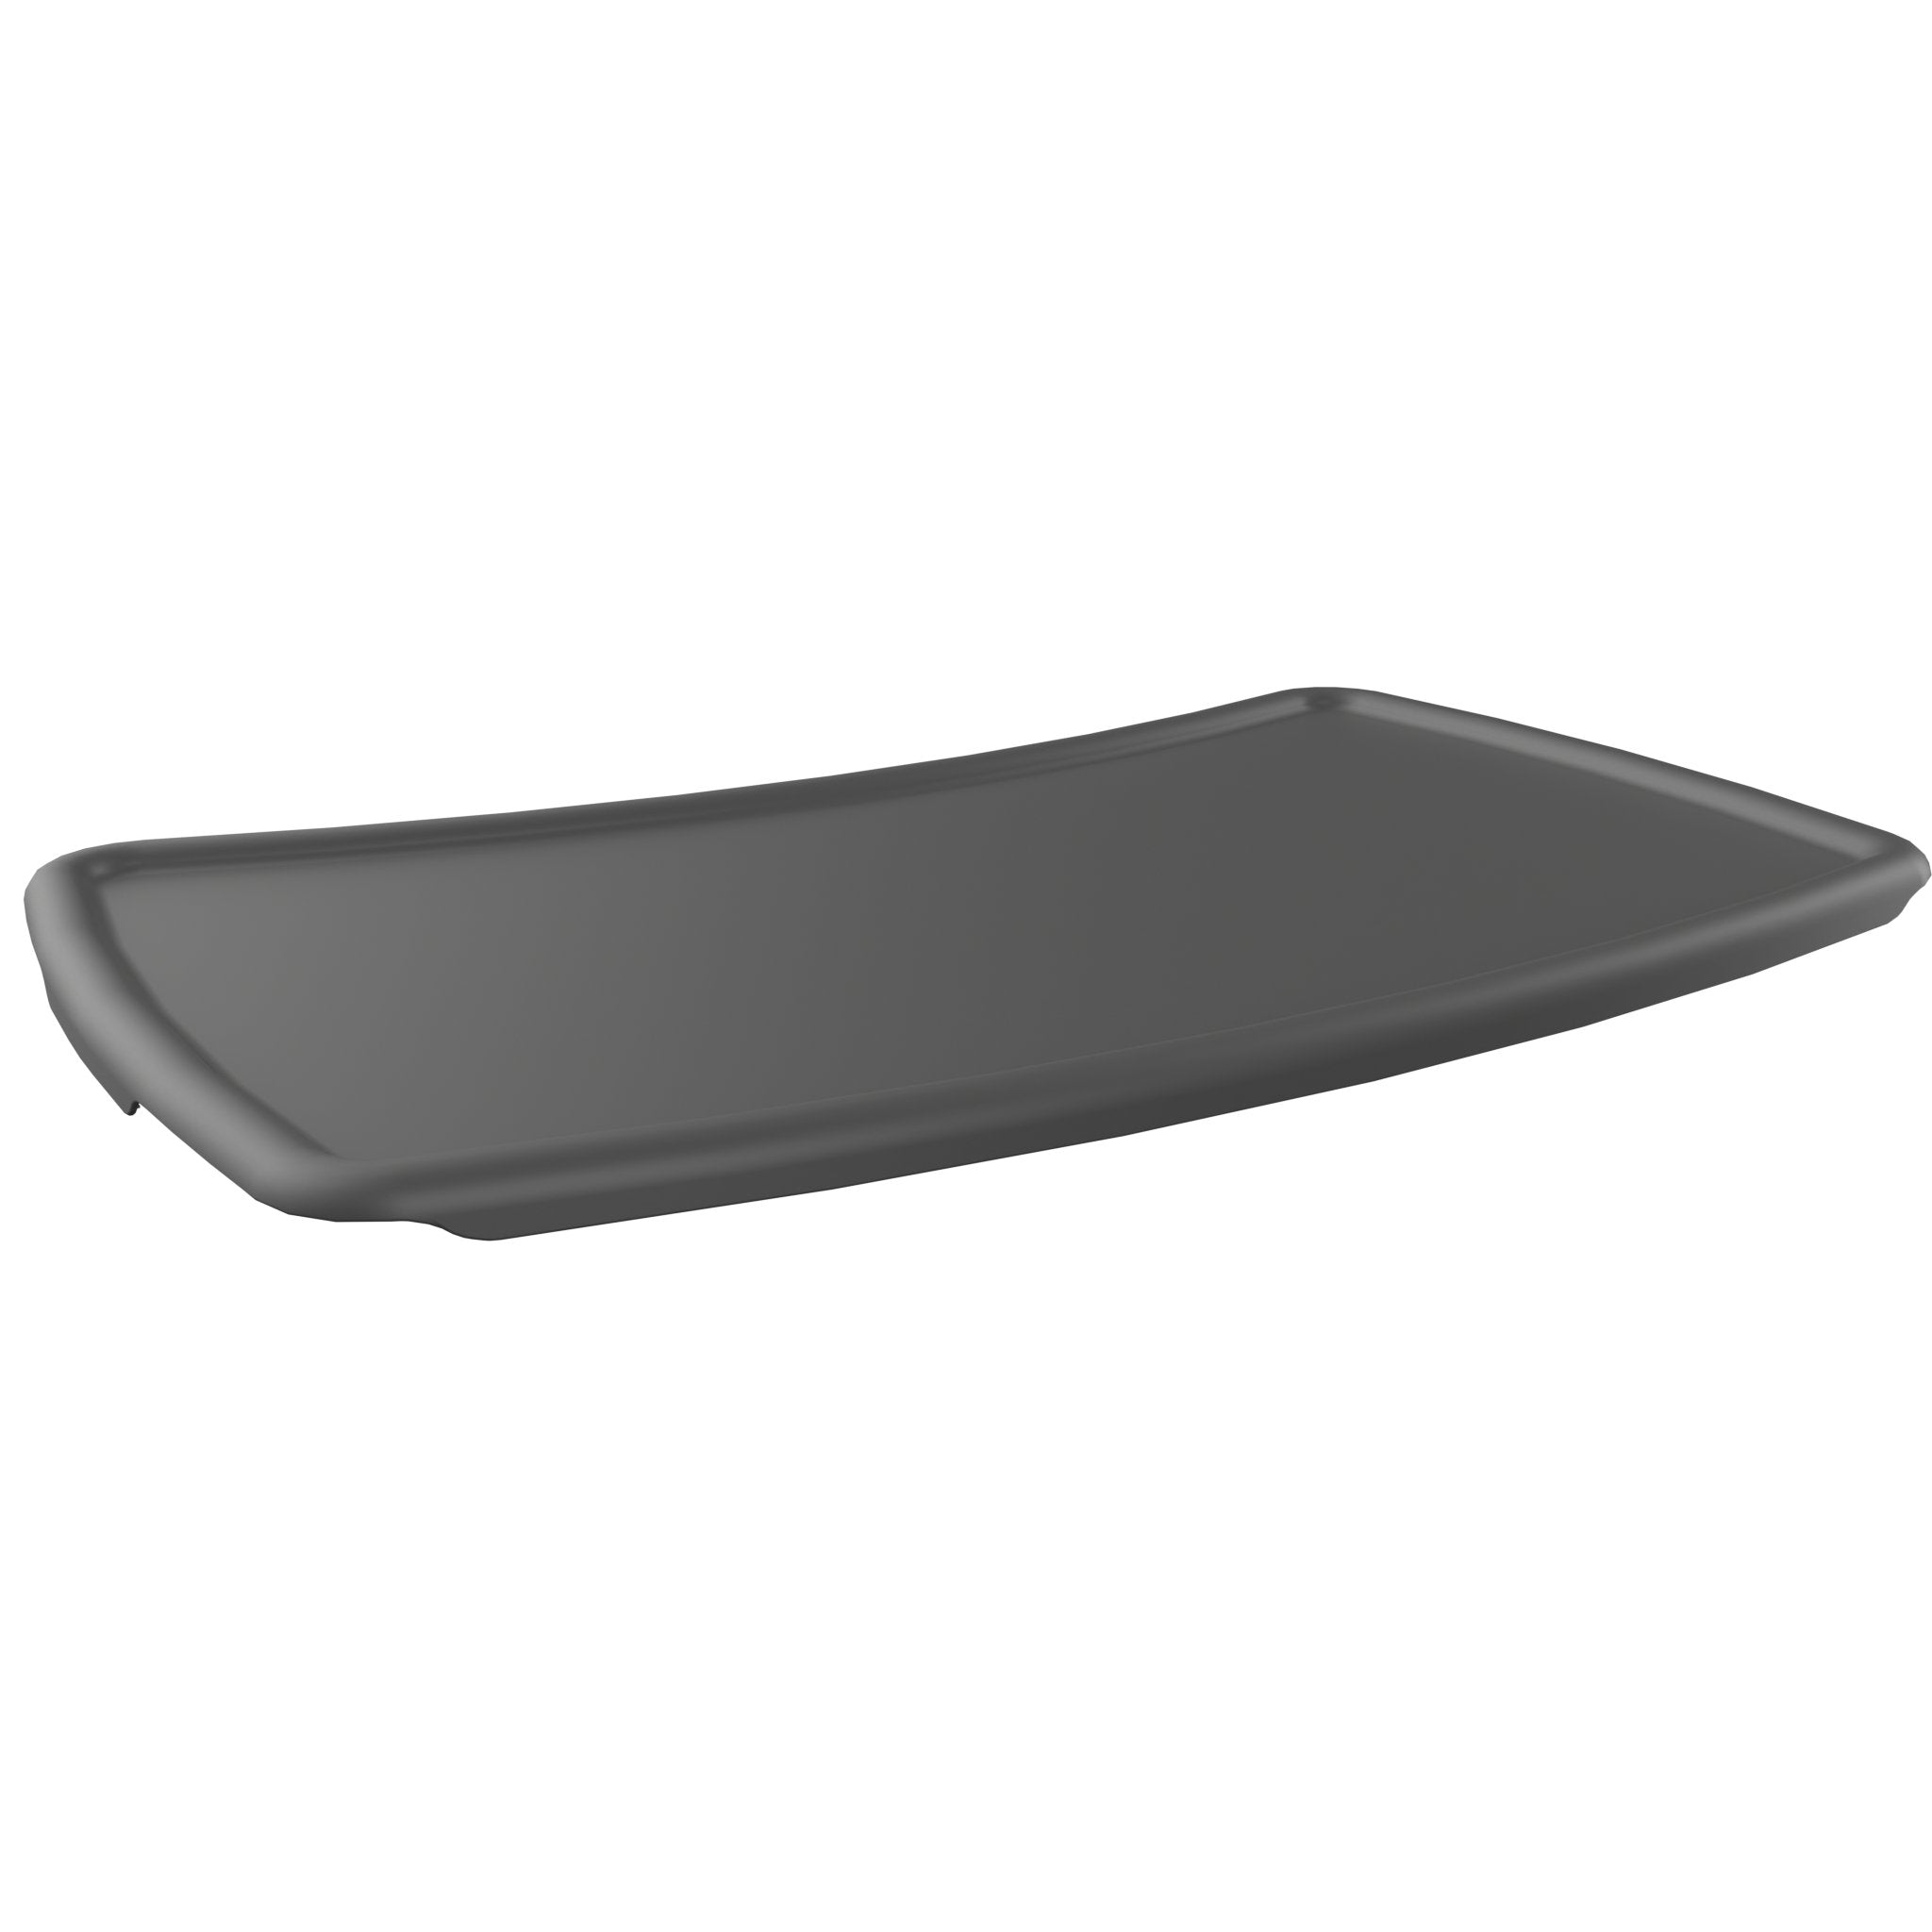 Melo Revel+ High Chair Tray Mat - ANB Baby -766429782261$20 - $50